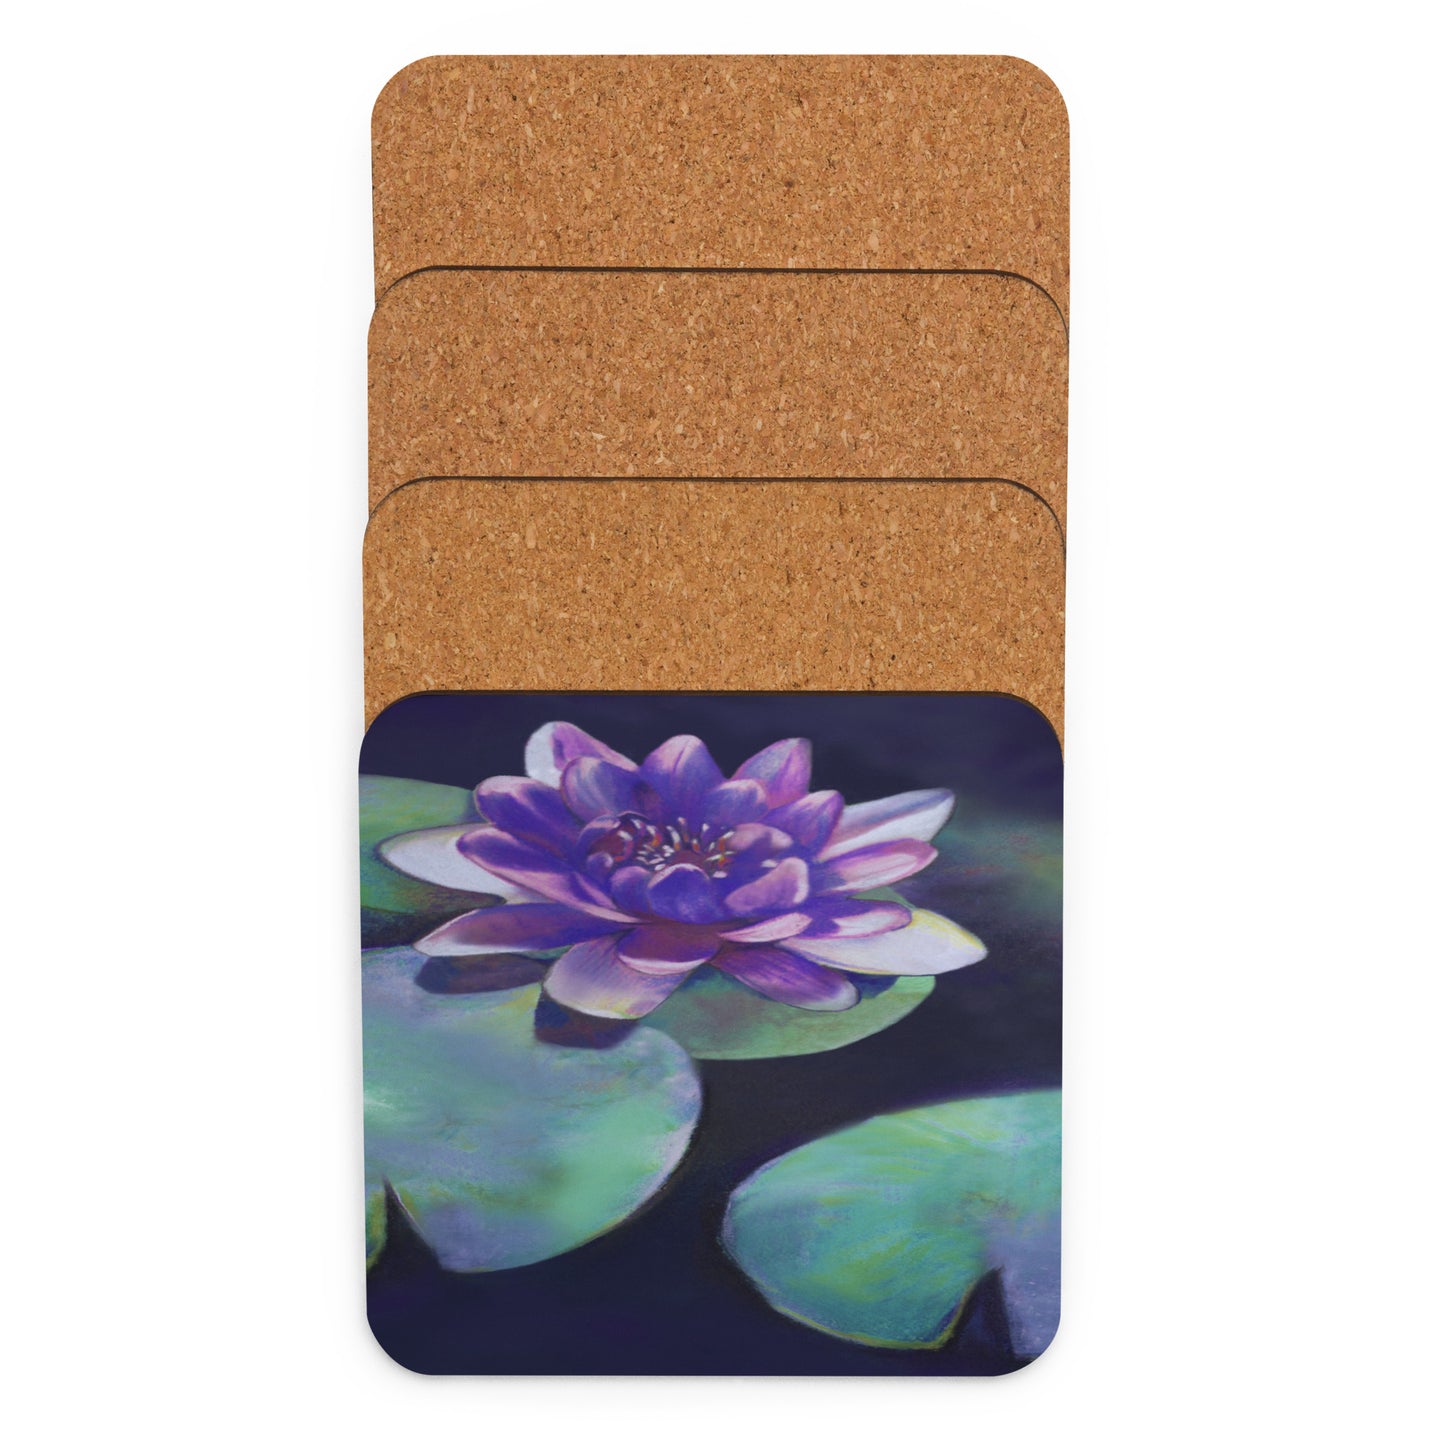 Purity Waterlily Coaster Set